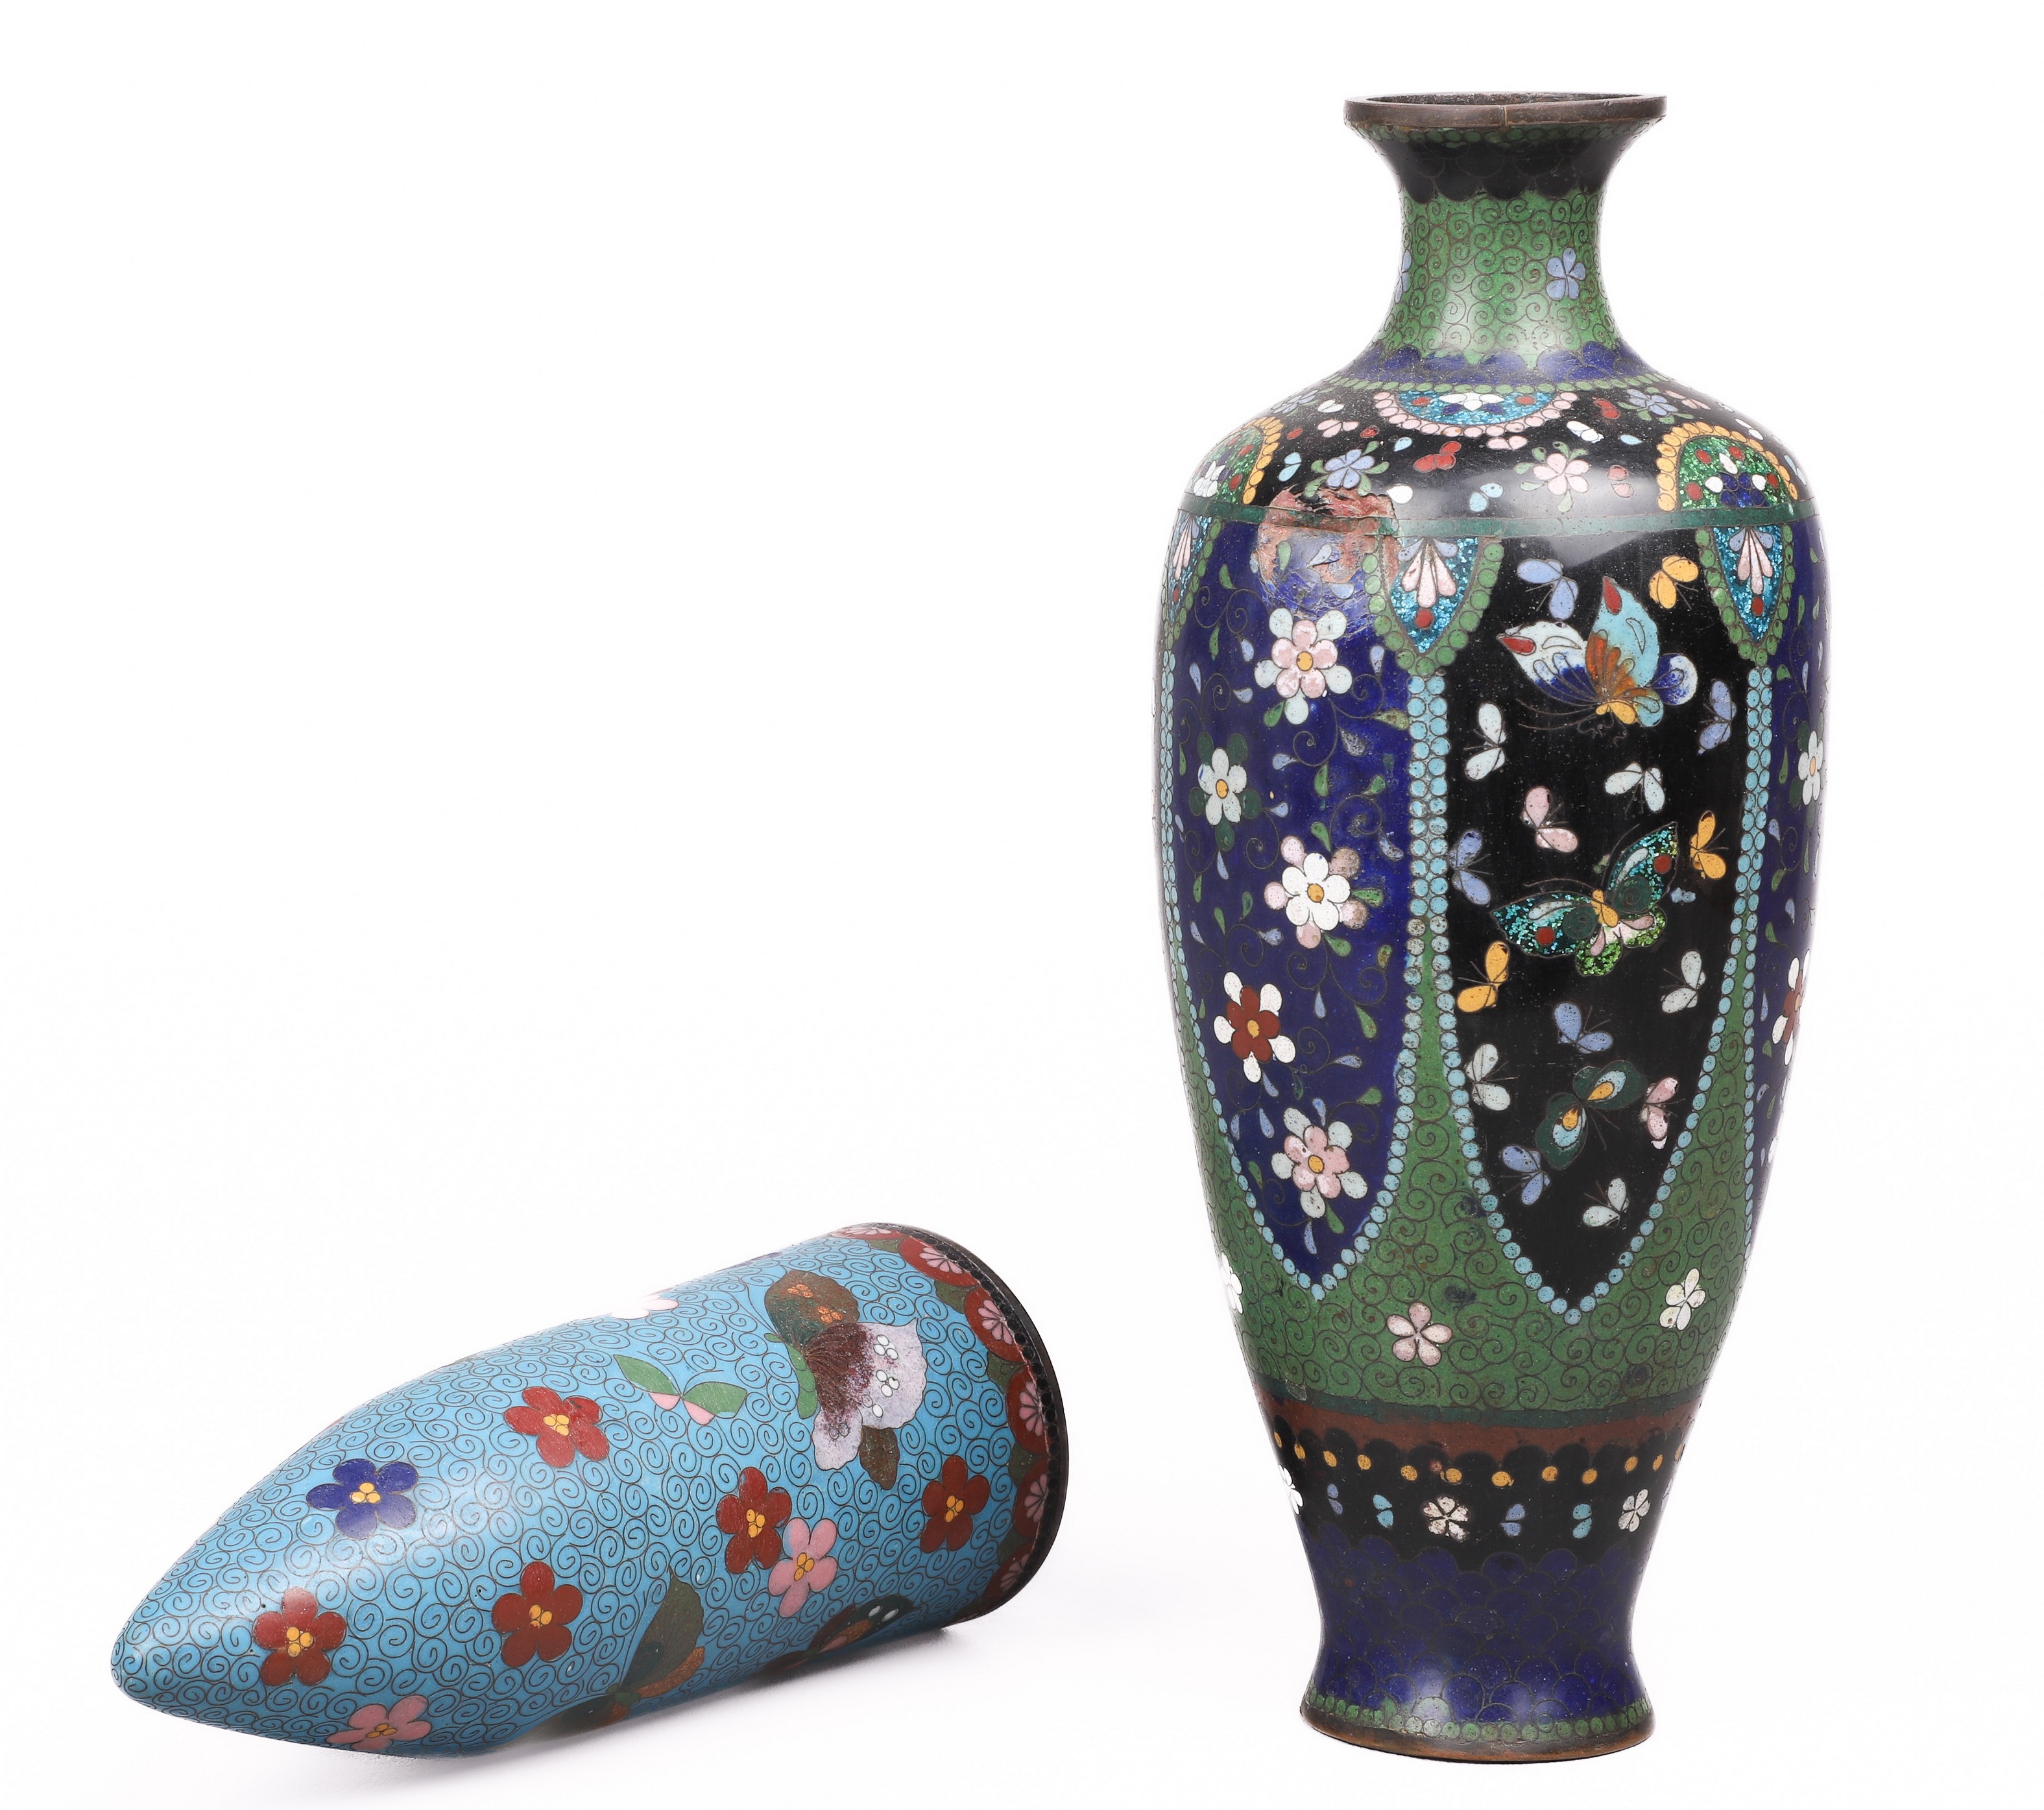 Japanese cloisonne vase and wall